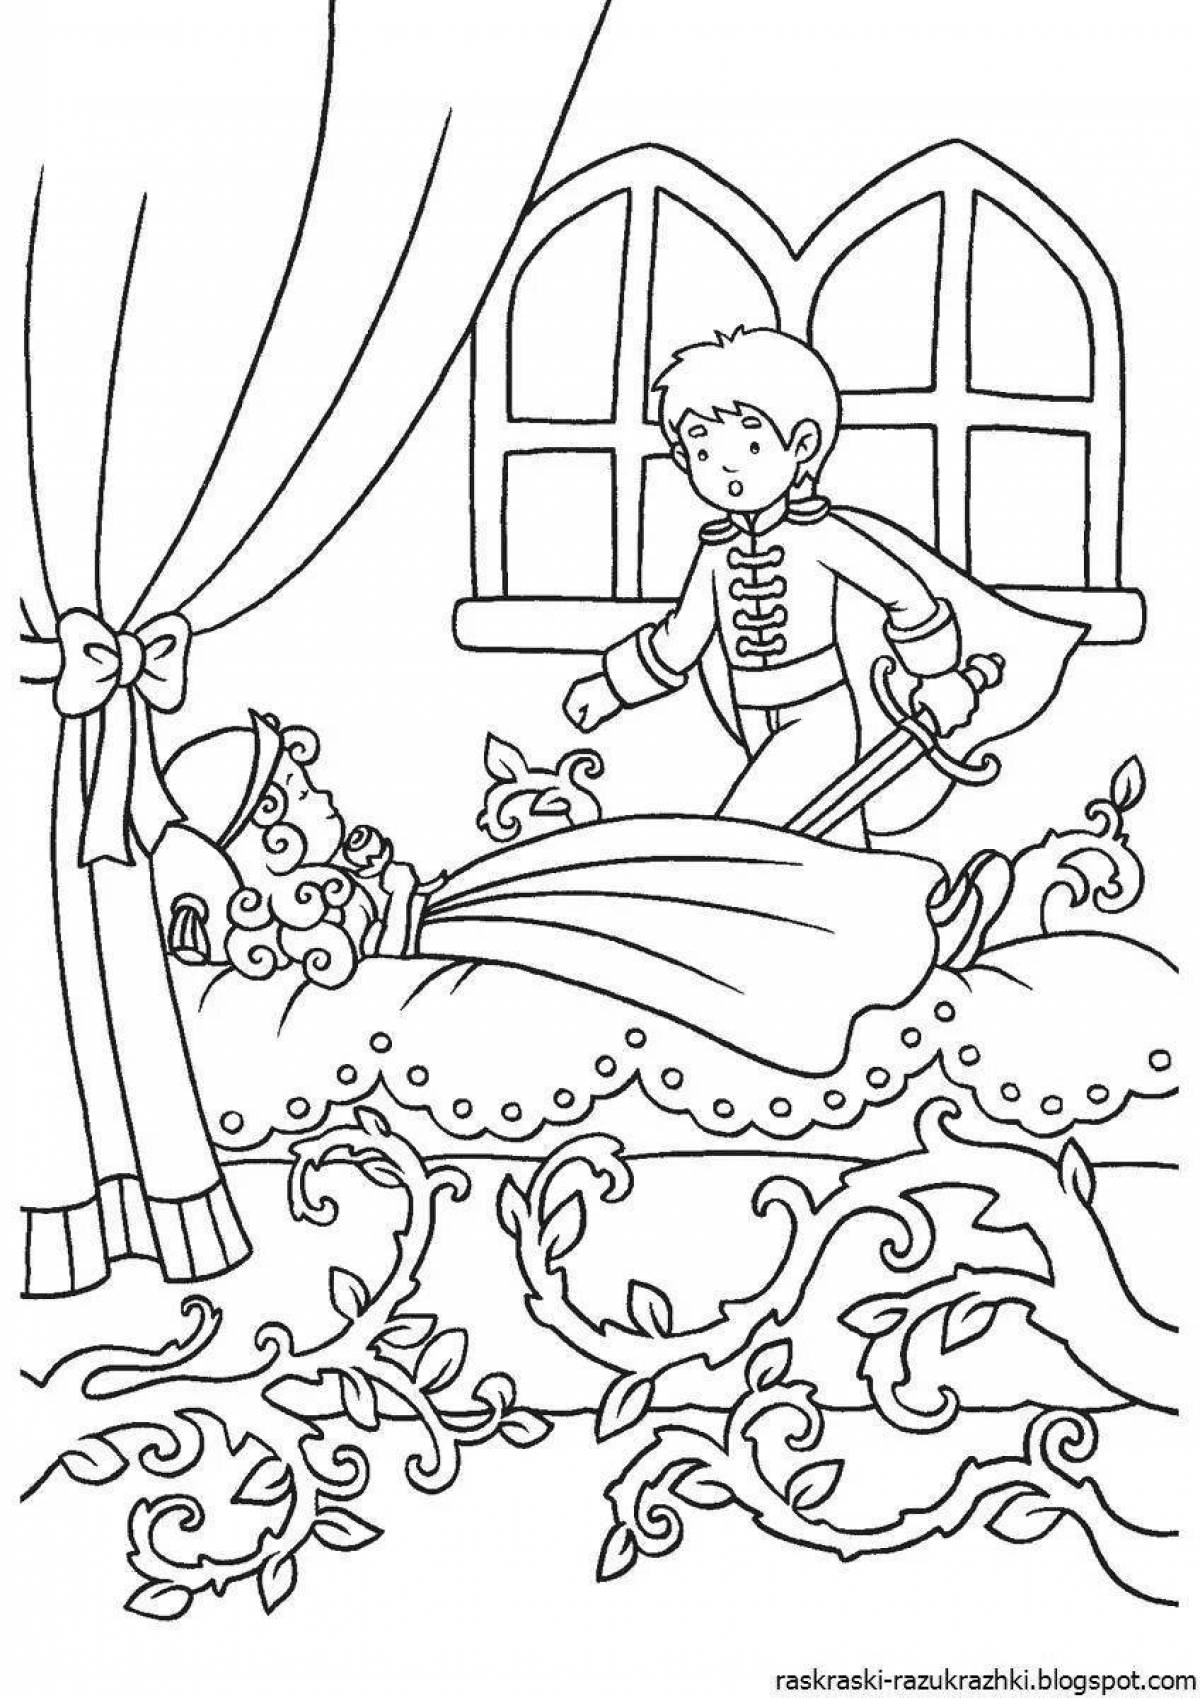 Inspirational coloring book based on fairy tales senior group